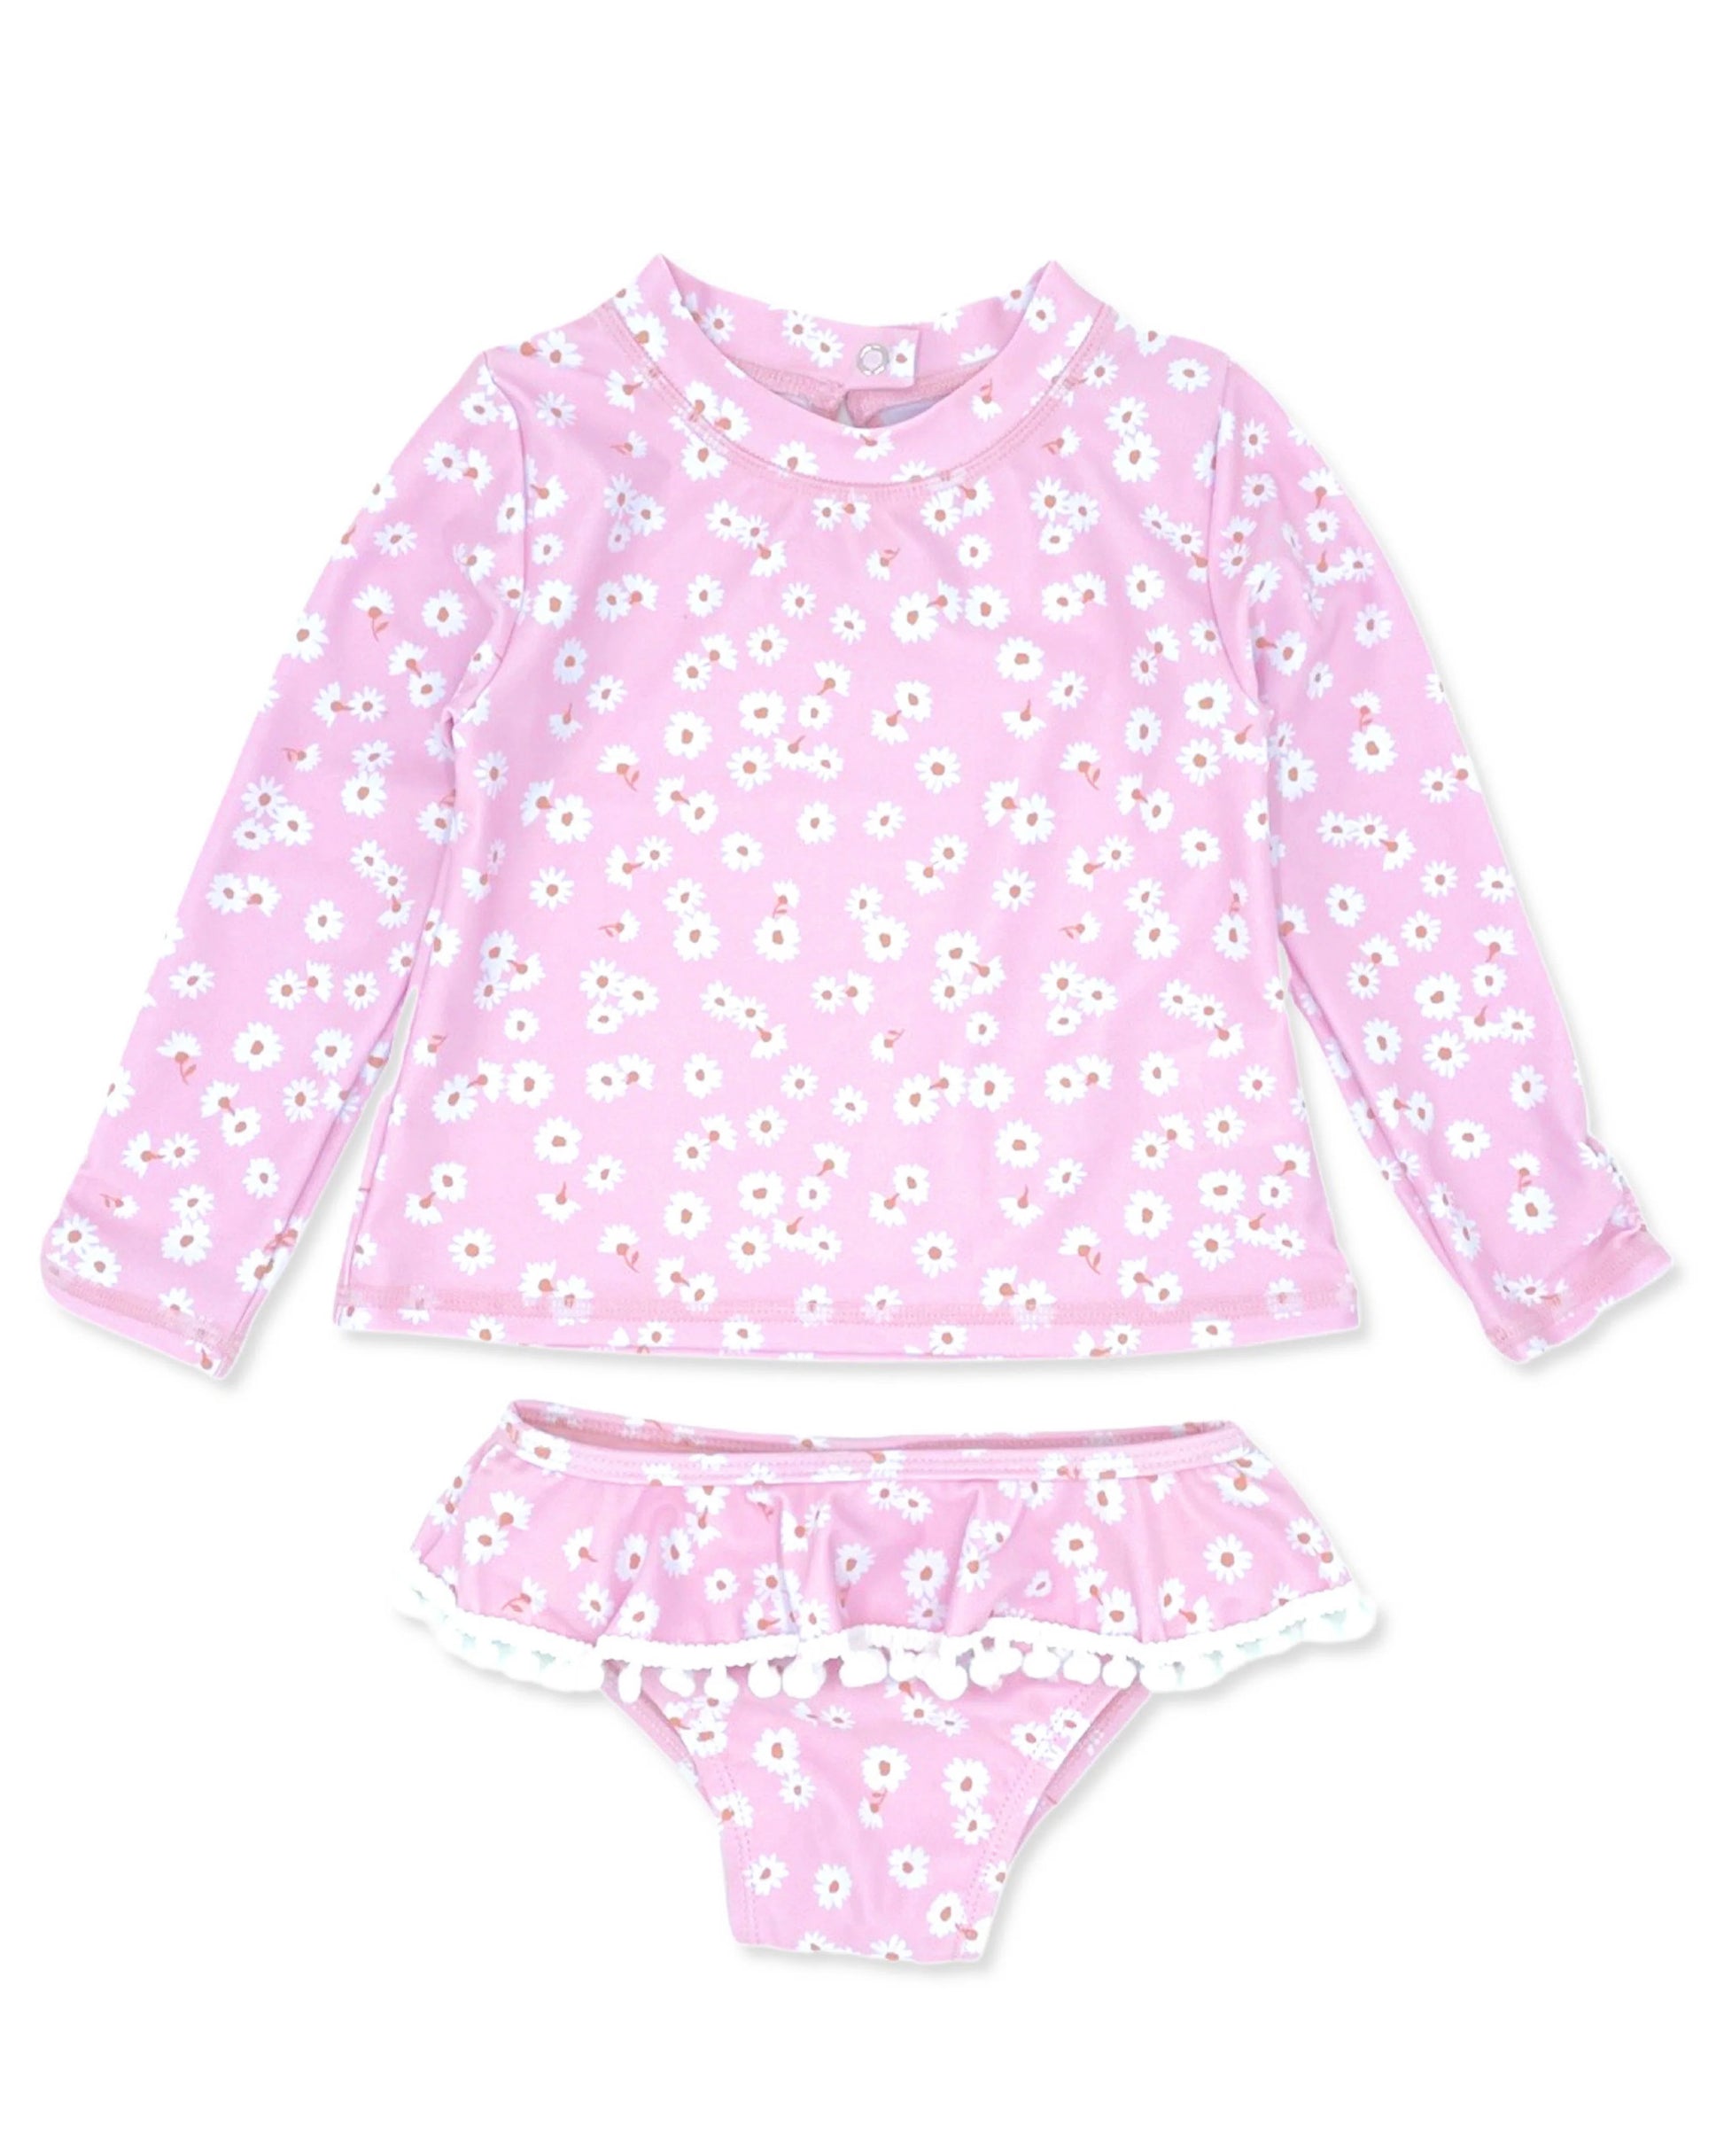 Sandy Toes Long Sleeve Set in Daisy  - Doodlebug's Children's Boutique